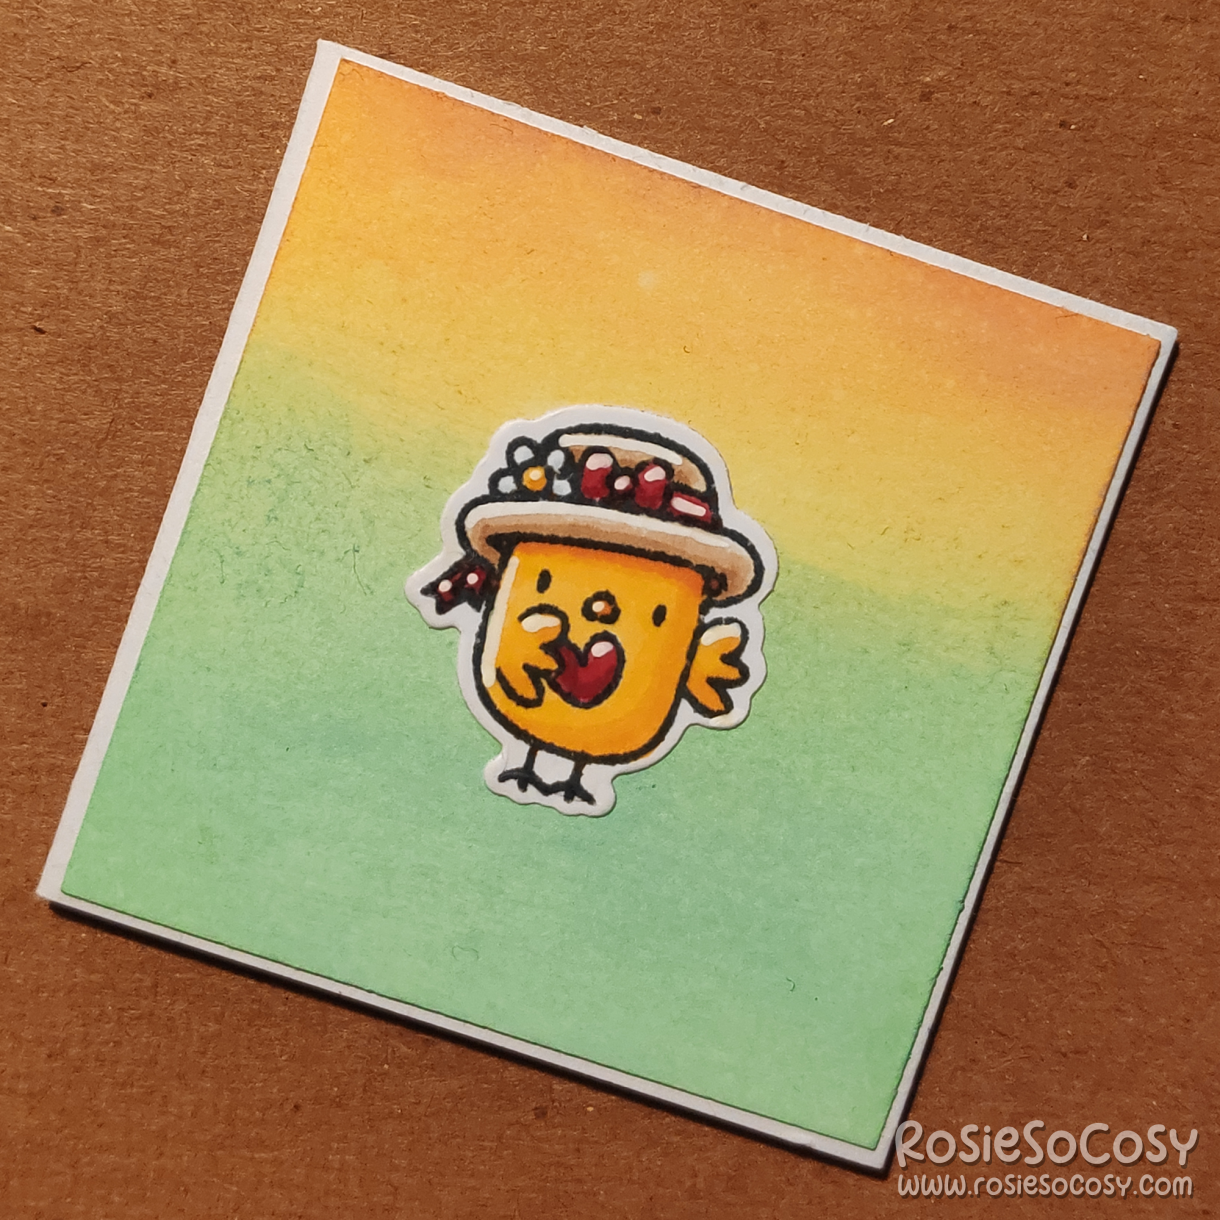 A inch sized card with a yellow to green gradient background. On the card is a tiny yellow chick with a cute floral hat, holding a tiny red heart.